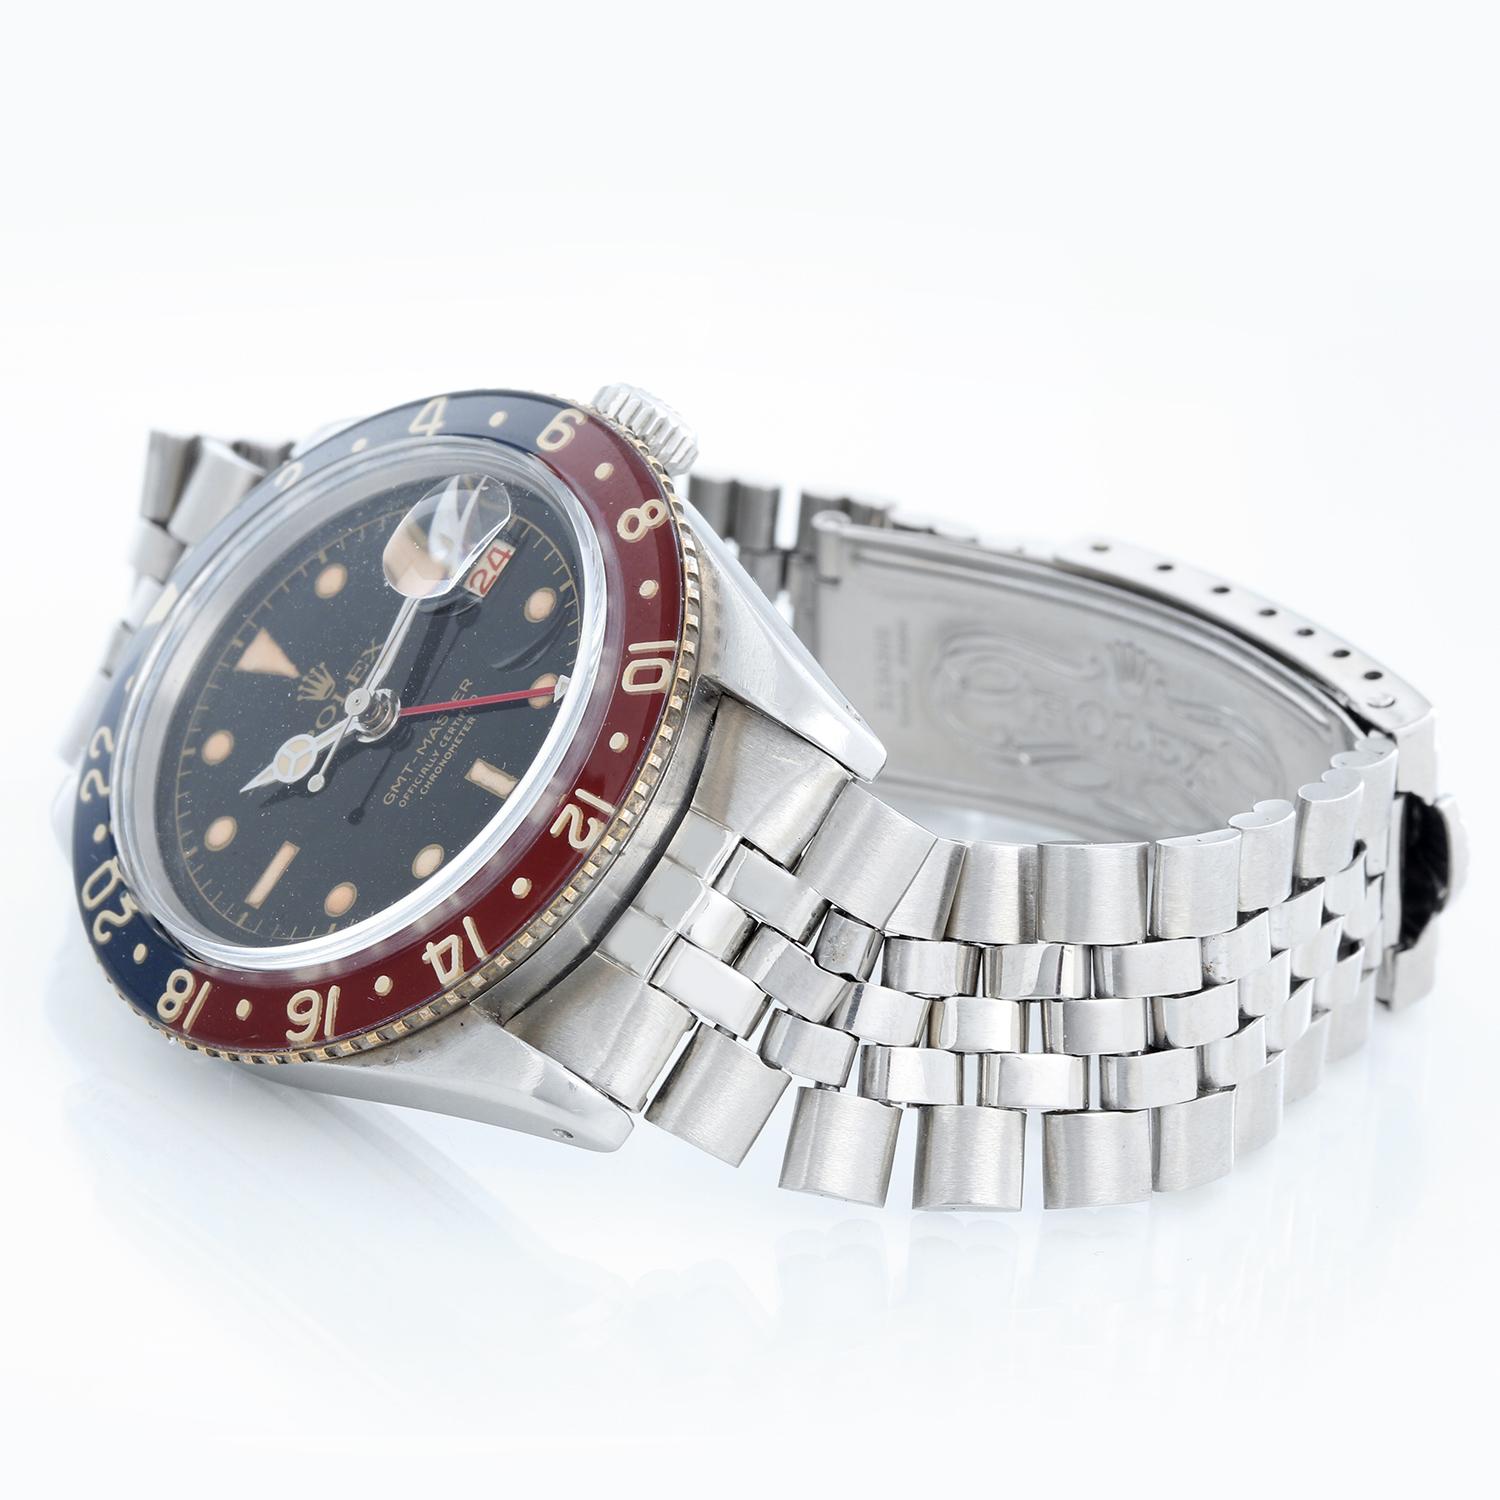 Men's Rolex GMT-Master Stainless Steel  Watch 6542 - Automatic winding, 31 jewels. Stainless steel case with blue and red rotating bezel (40 mm). Black dial with luminous markers. Stainless steel Rolex Jubilee bracelet. Pre-owned with Rolex box.